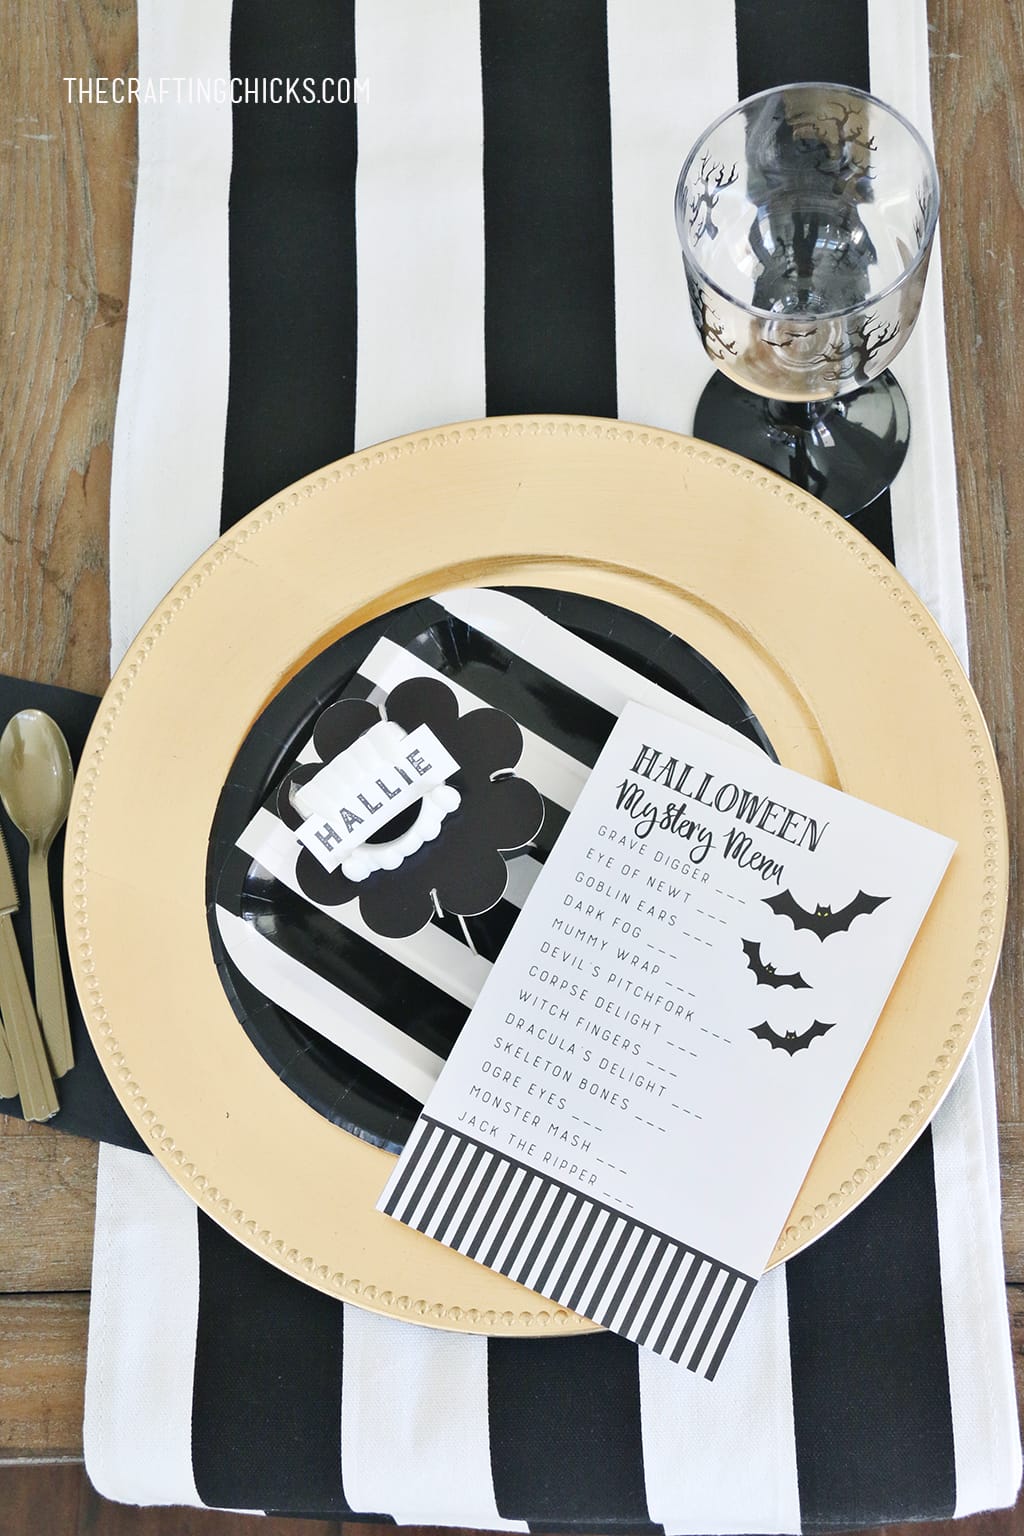 Halloween Mystery Dinner Party Free Menu for a Mystery Halloween Dinner